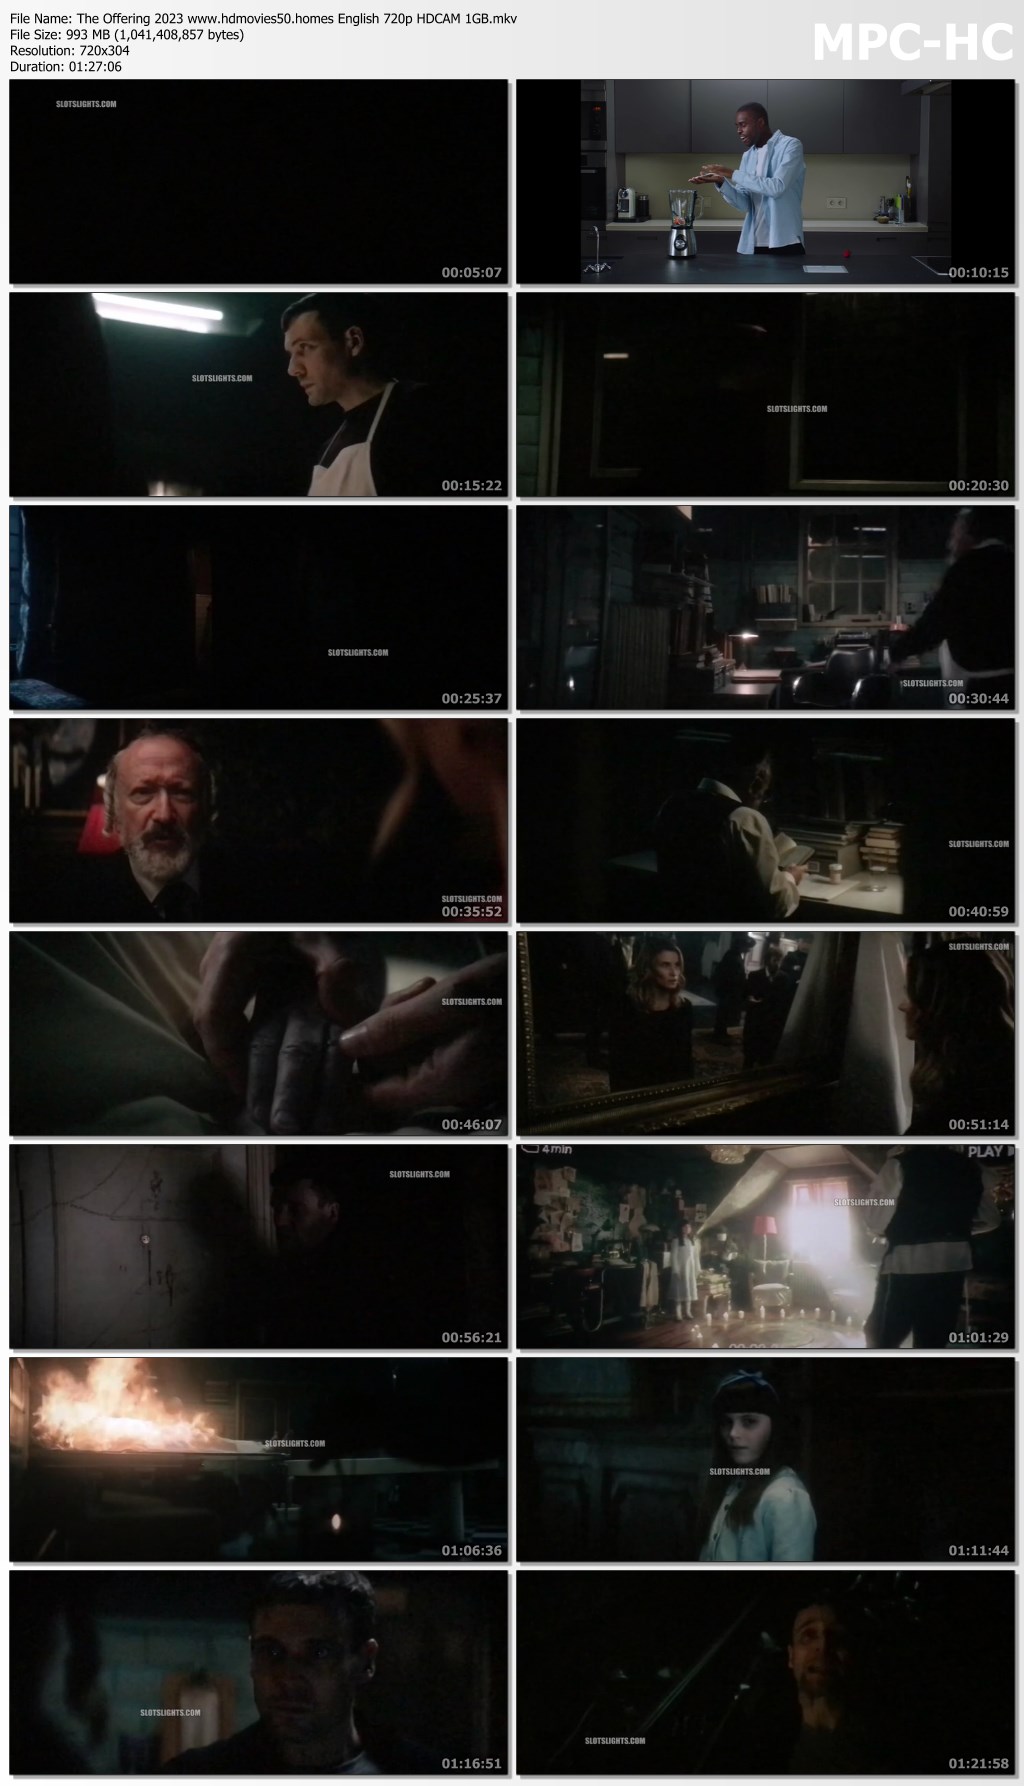 The Offering 2023 www.hdmovies50.homes English 720p HDCAM 1GB.mkv thumbs